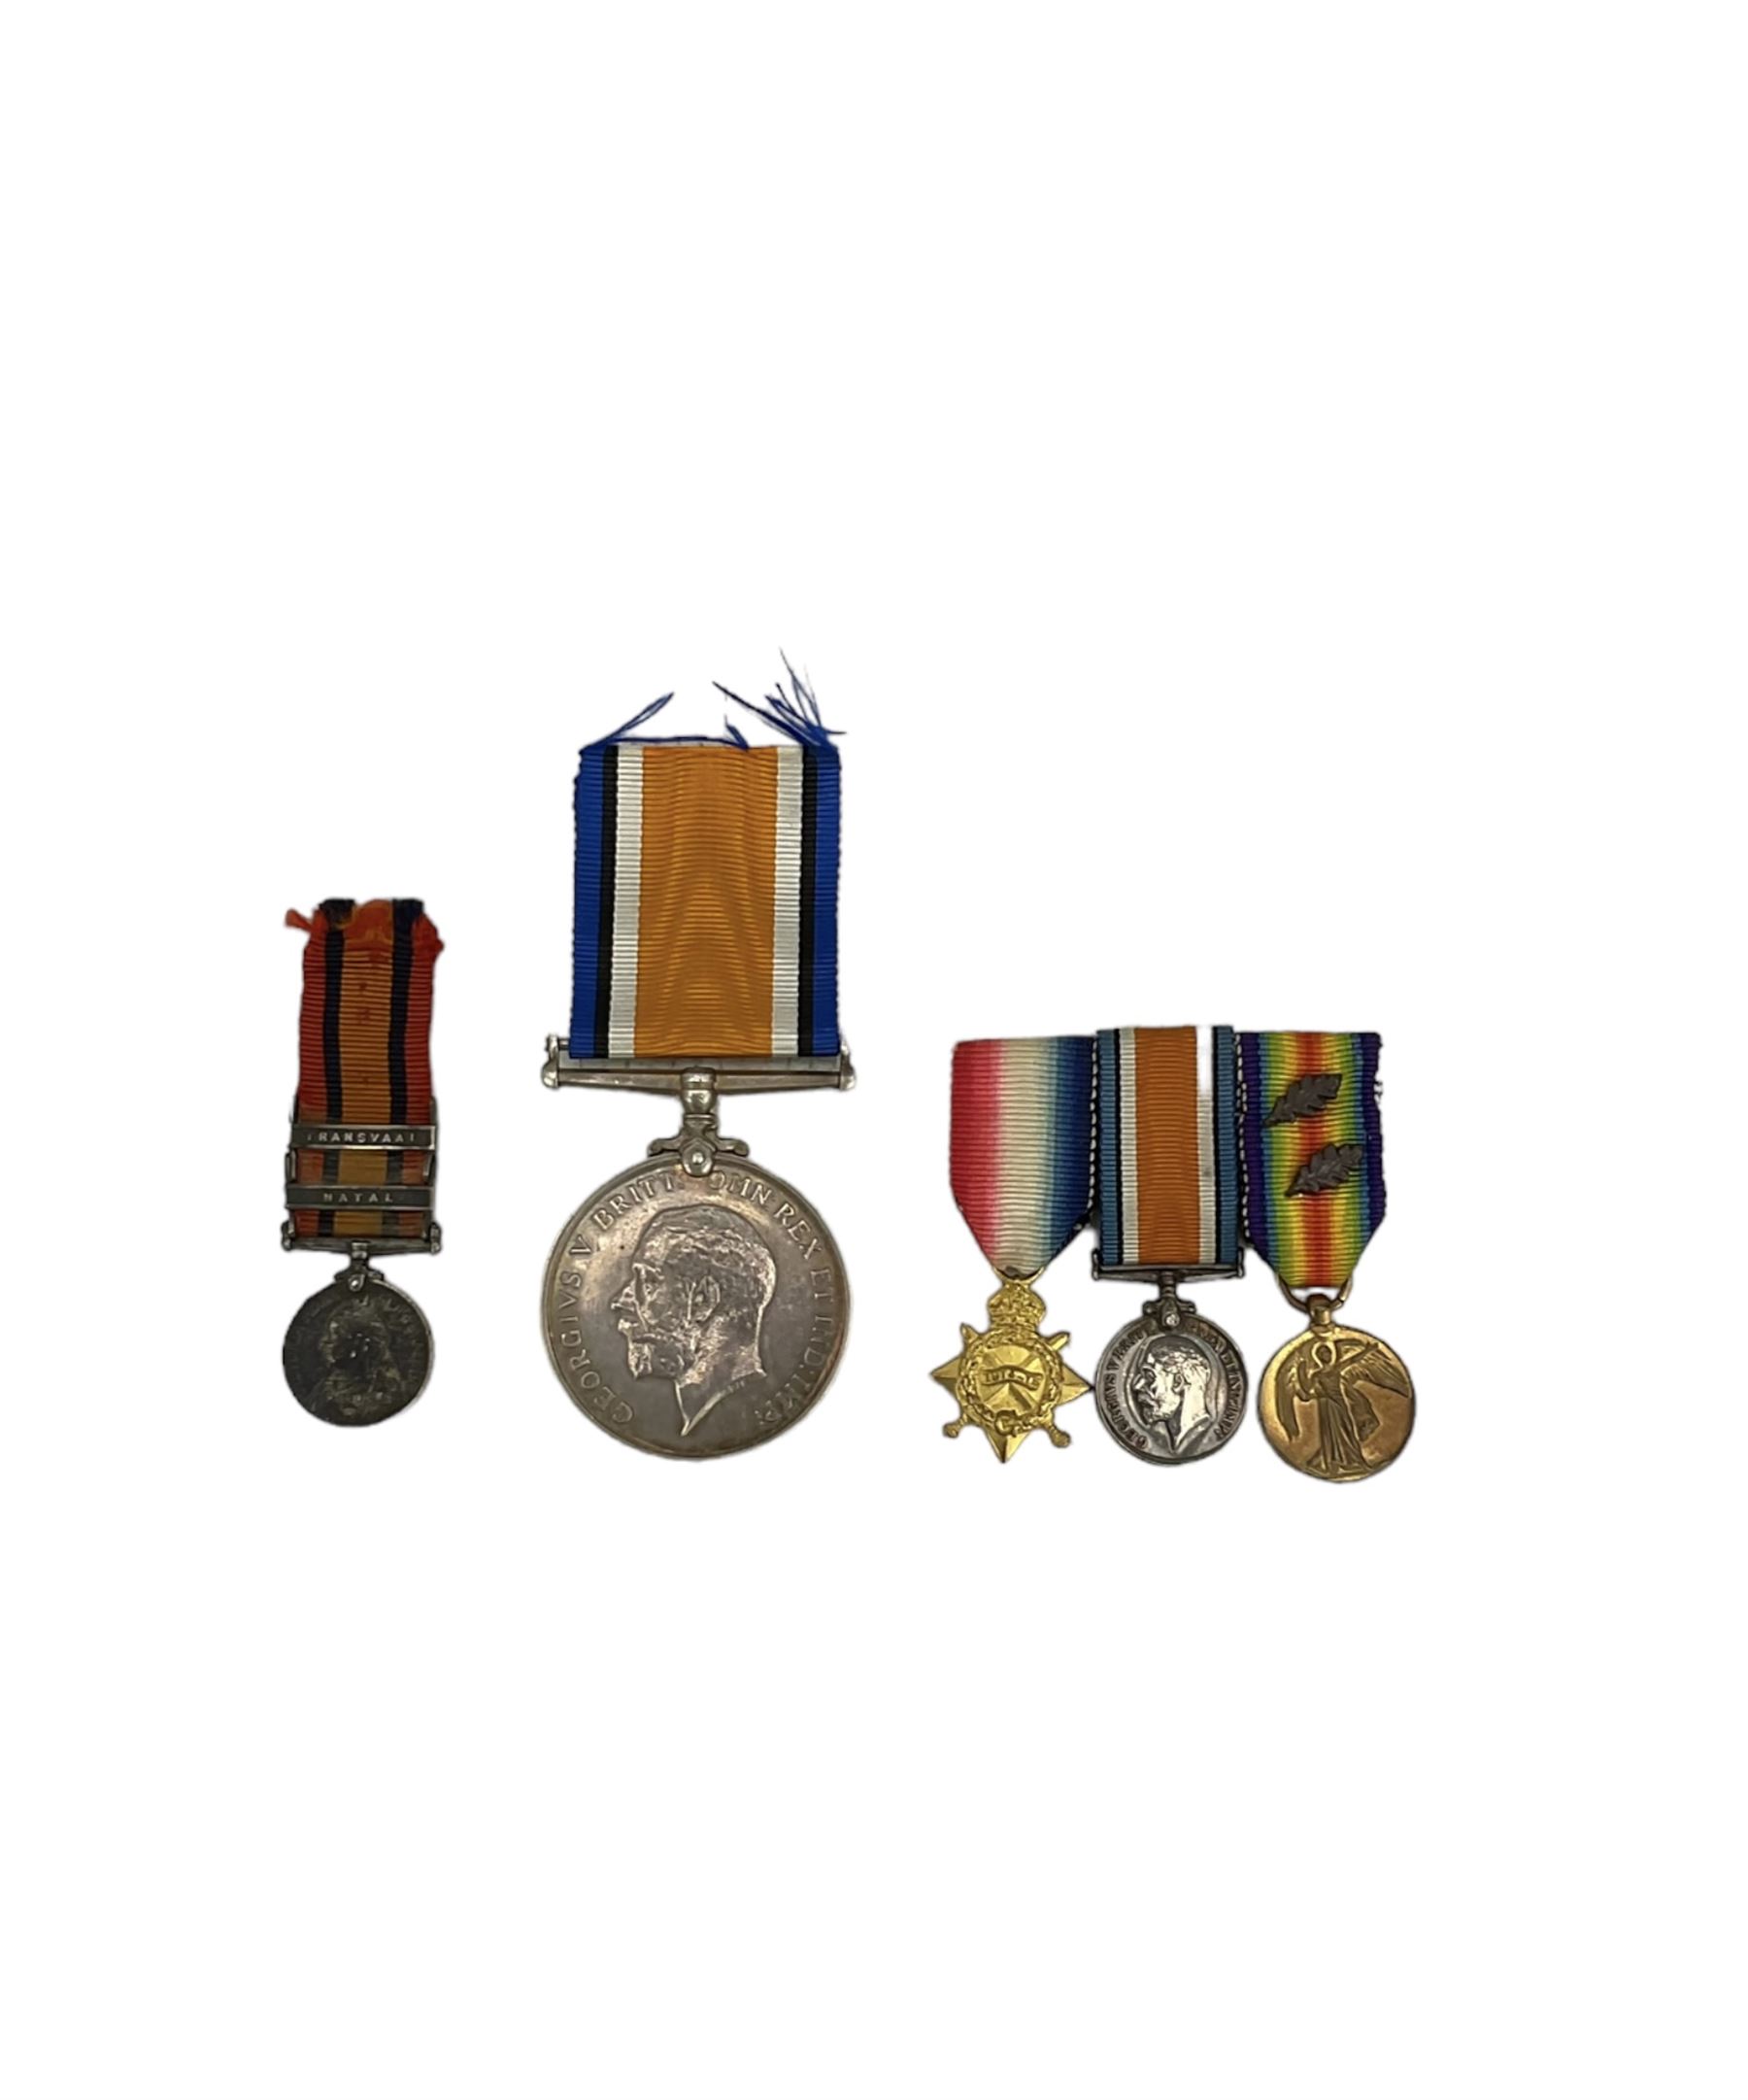 Queen's South Africa miniature medal with Transvaal and Natal clasps